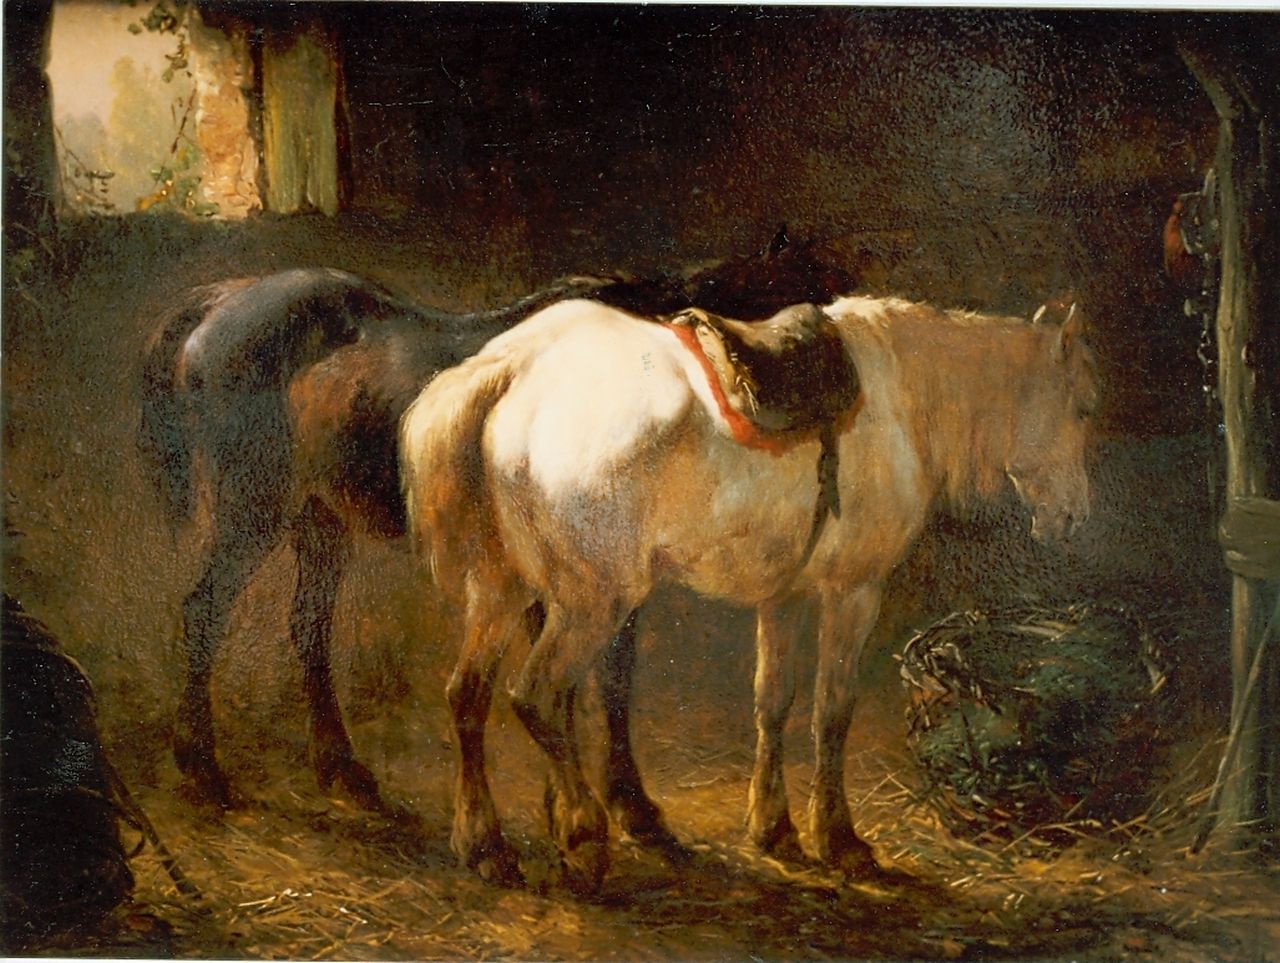 Verschuur W.  | Wouterus Verschuur, Stable interior with two horses, oil on canvas laid down on panel 18.1 x 24.2 cm, signed l.r.